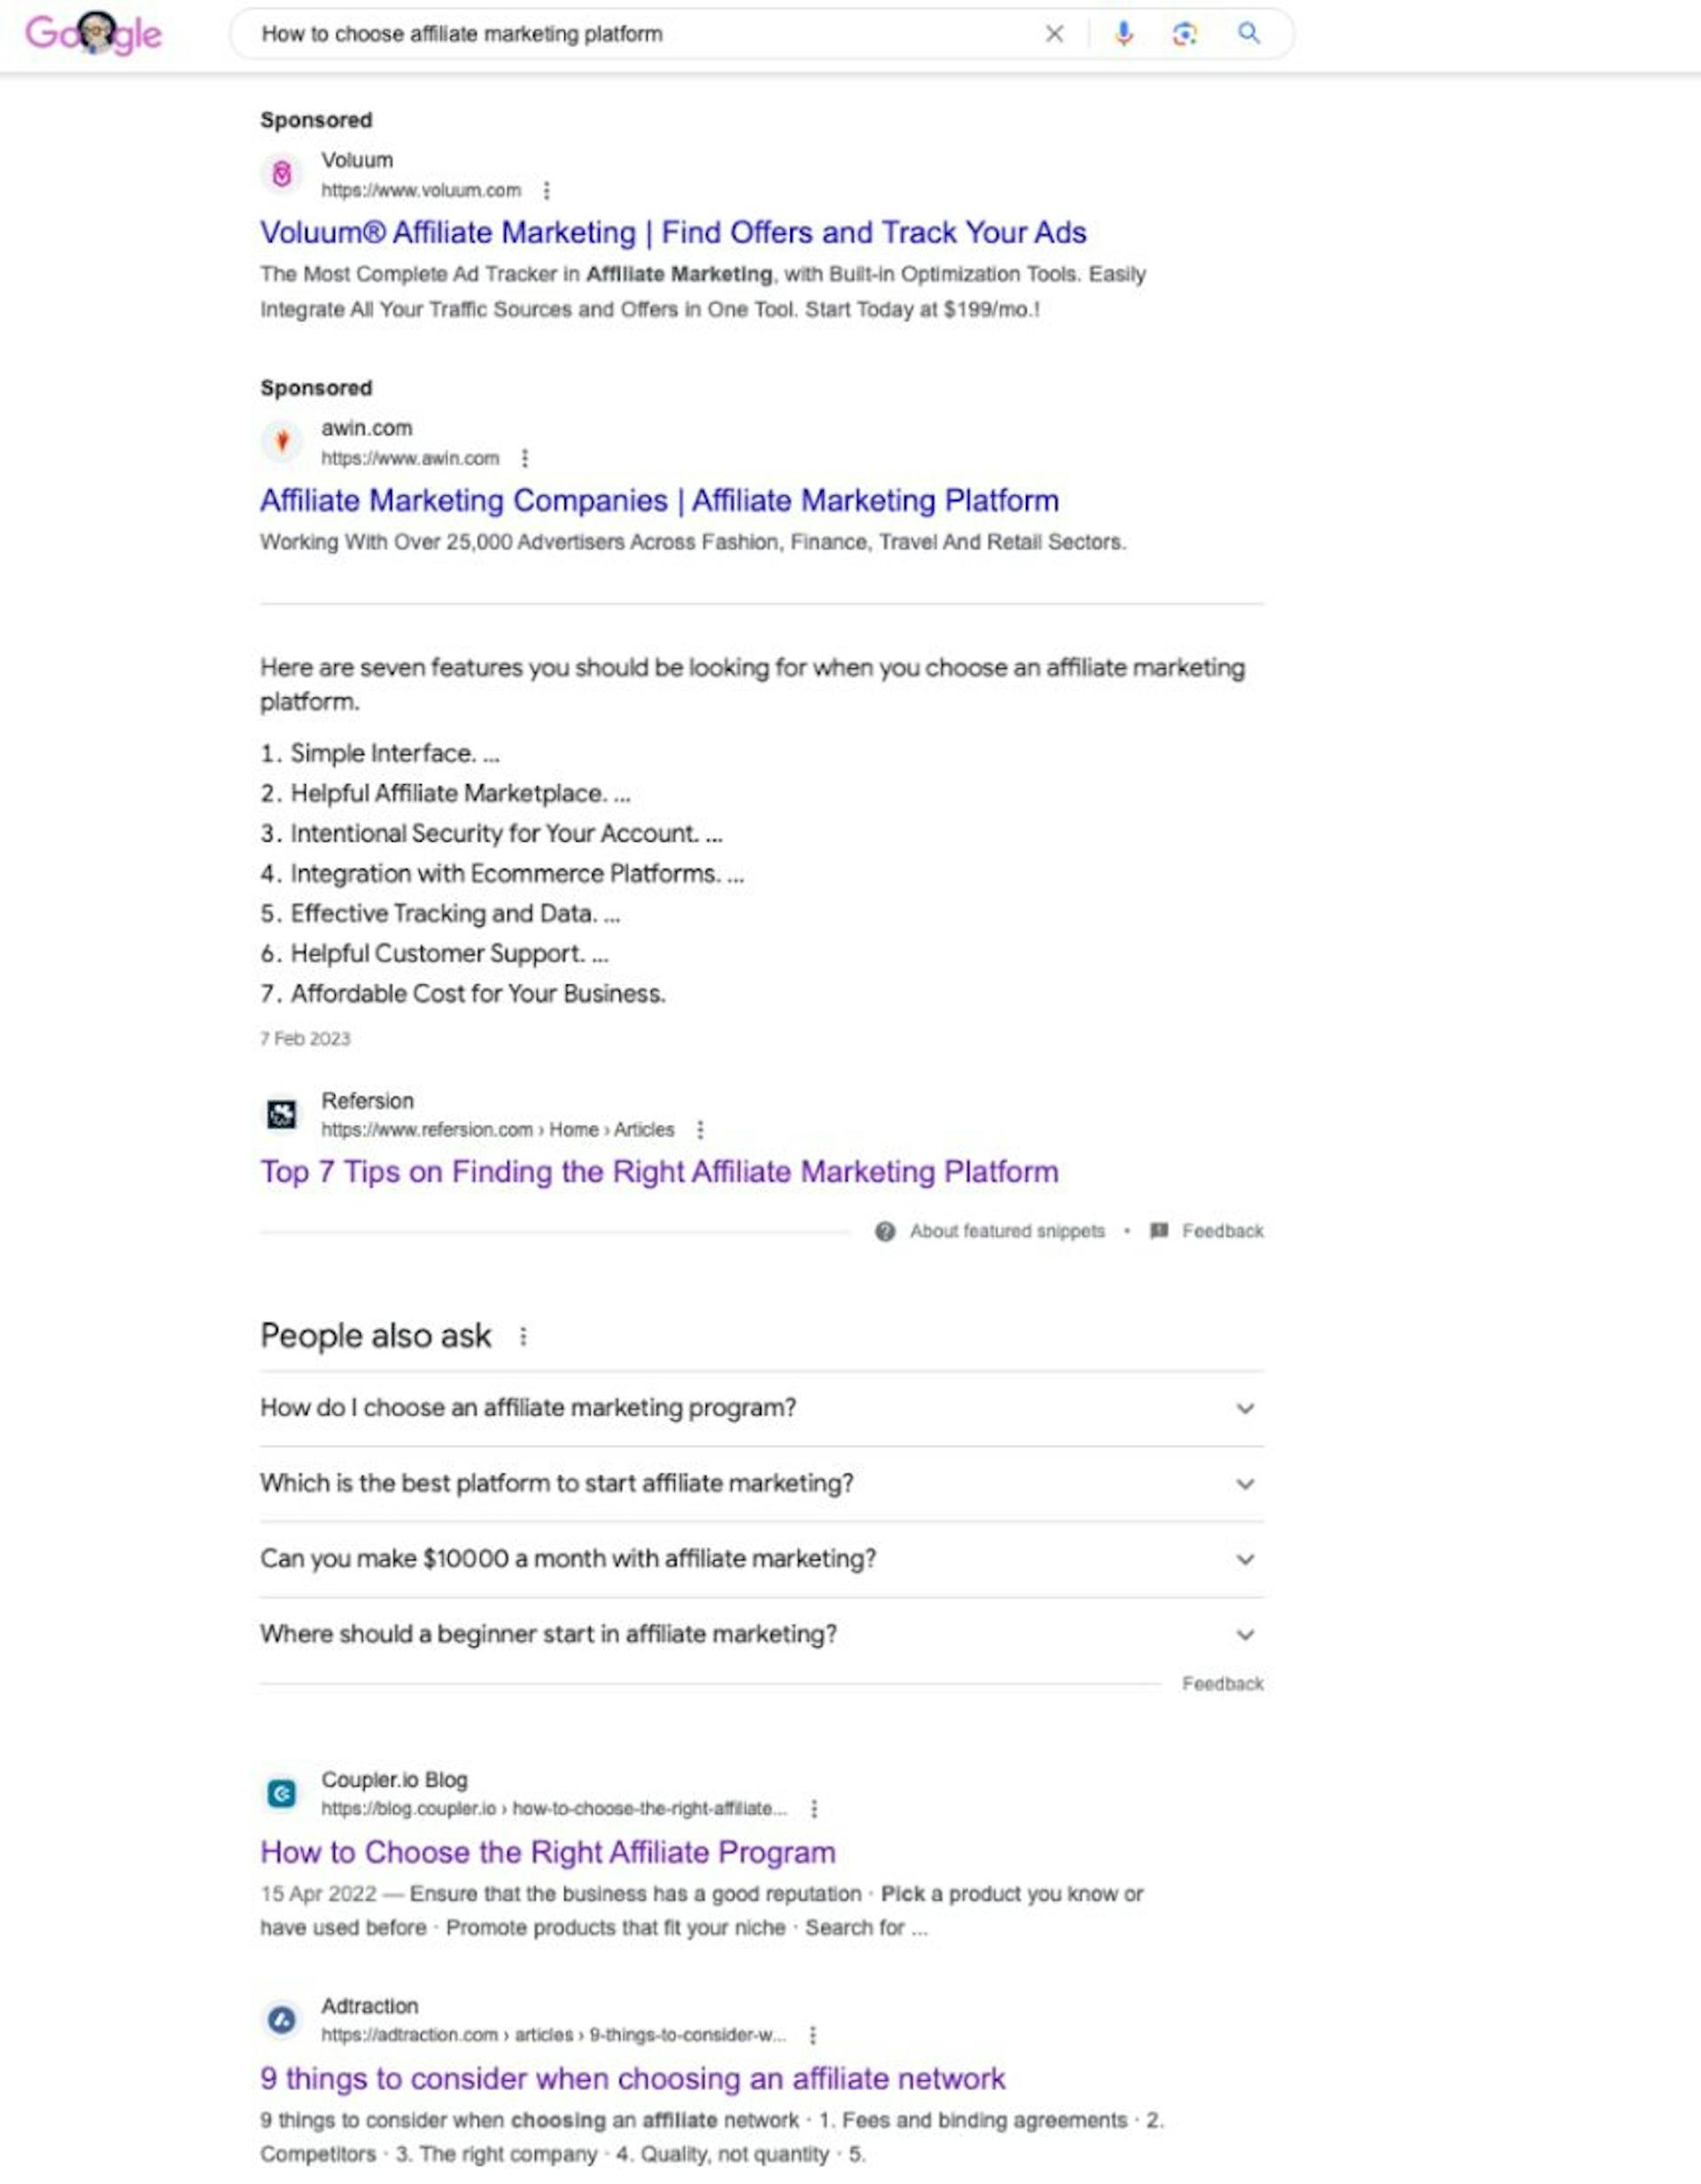 Example of SERP competition